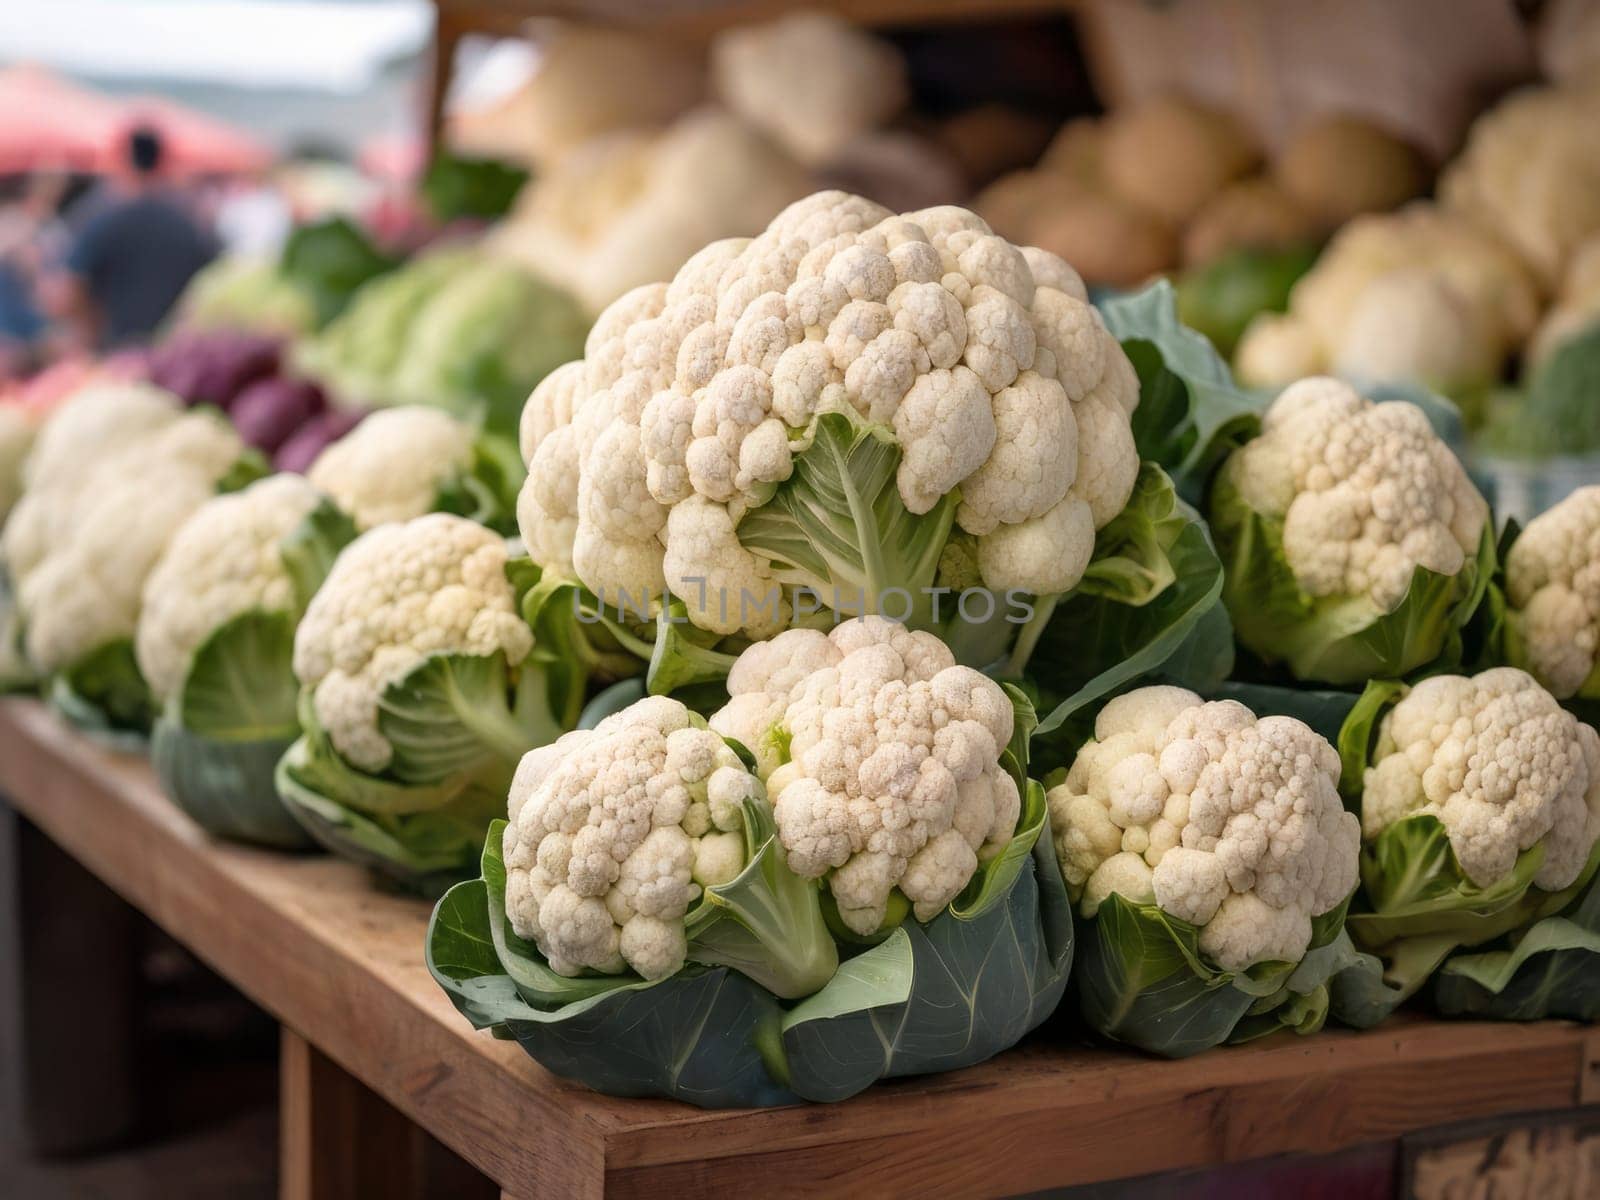 A vibrant display of fresh organic cauliflower at a local farmer's market, showcasing the natural beauty of the vegetable and the vibrant atmosphere of the market. by Annu1tochka